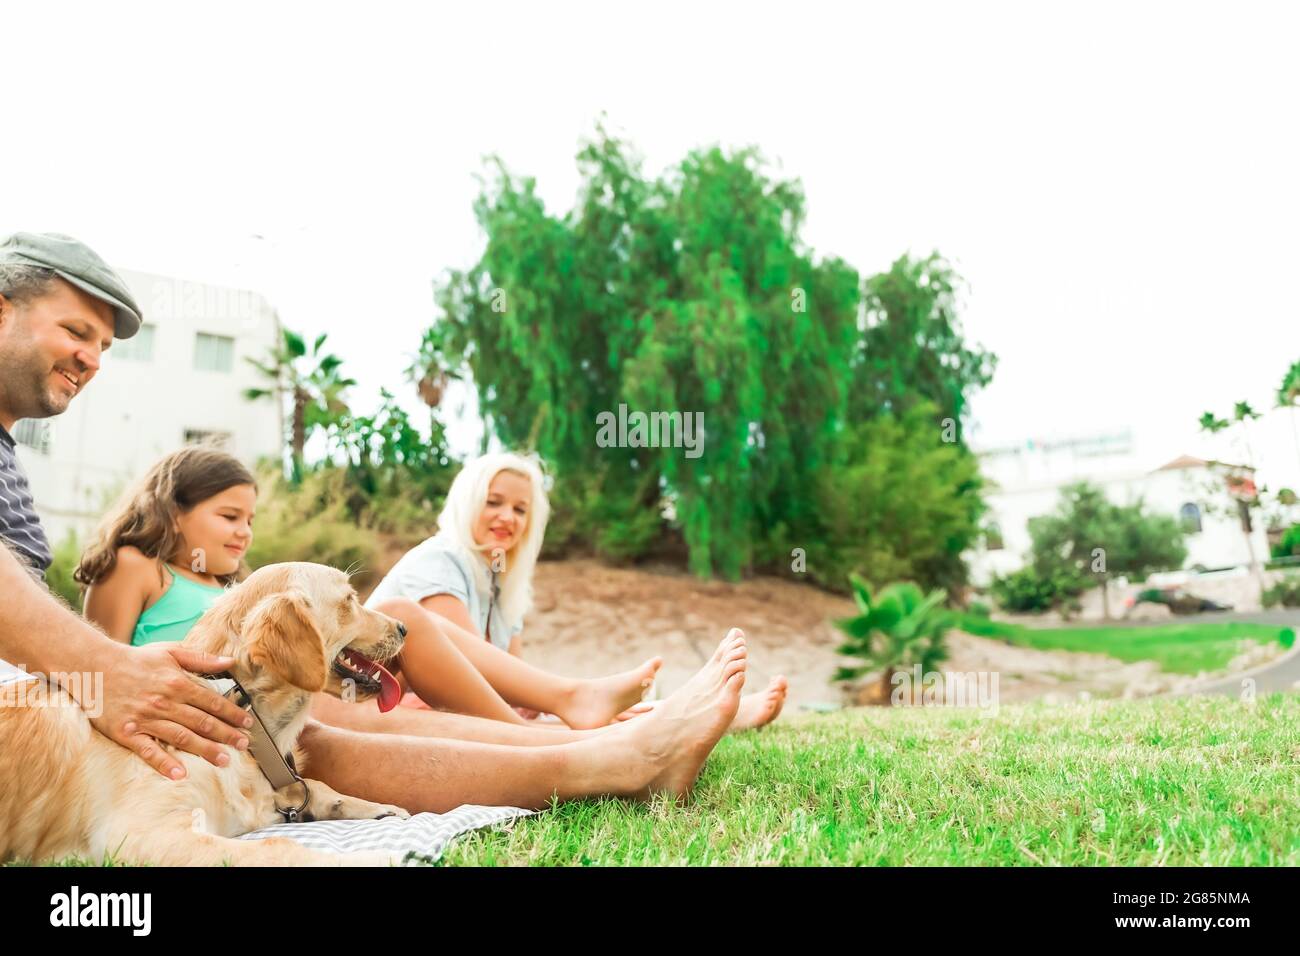 Family playing with the dog. beautiful day in the park. Happy family doing picnic in the nature outdoor. Focus the dog. Animal and love concept. Stock Photo